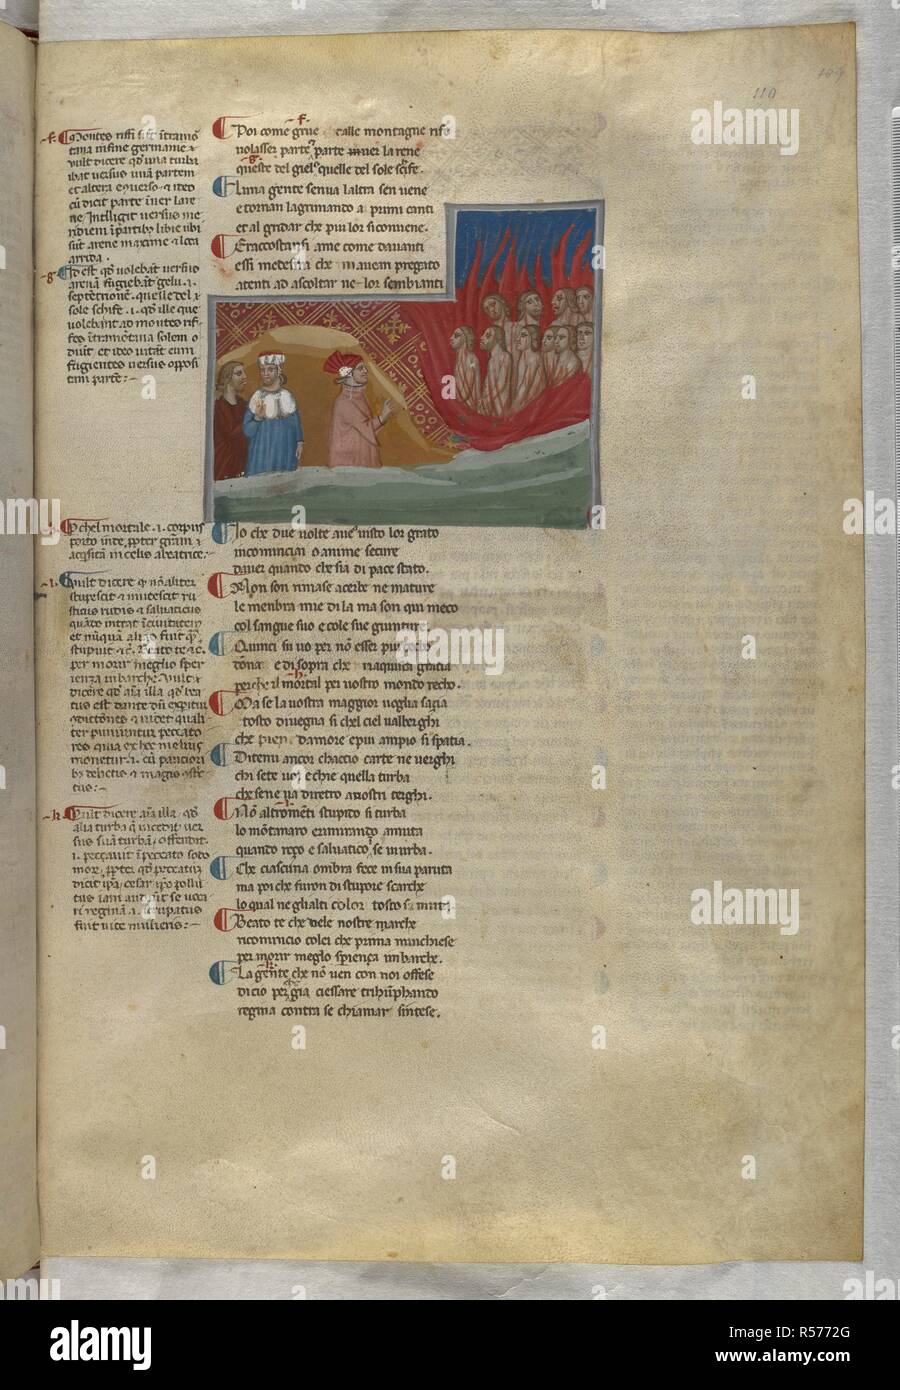 Dante talks to the souls. Purgatorio, with Latin commentary. Dante Alighieri, Divina Commedia ( The Divine Comedy ), with a commentary in Latin. 1st half of the 14th century. Source: Egerton 943, f.110. Language: Italian, Latin. Stock Photo